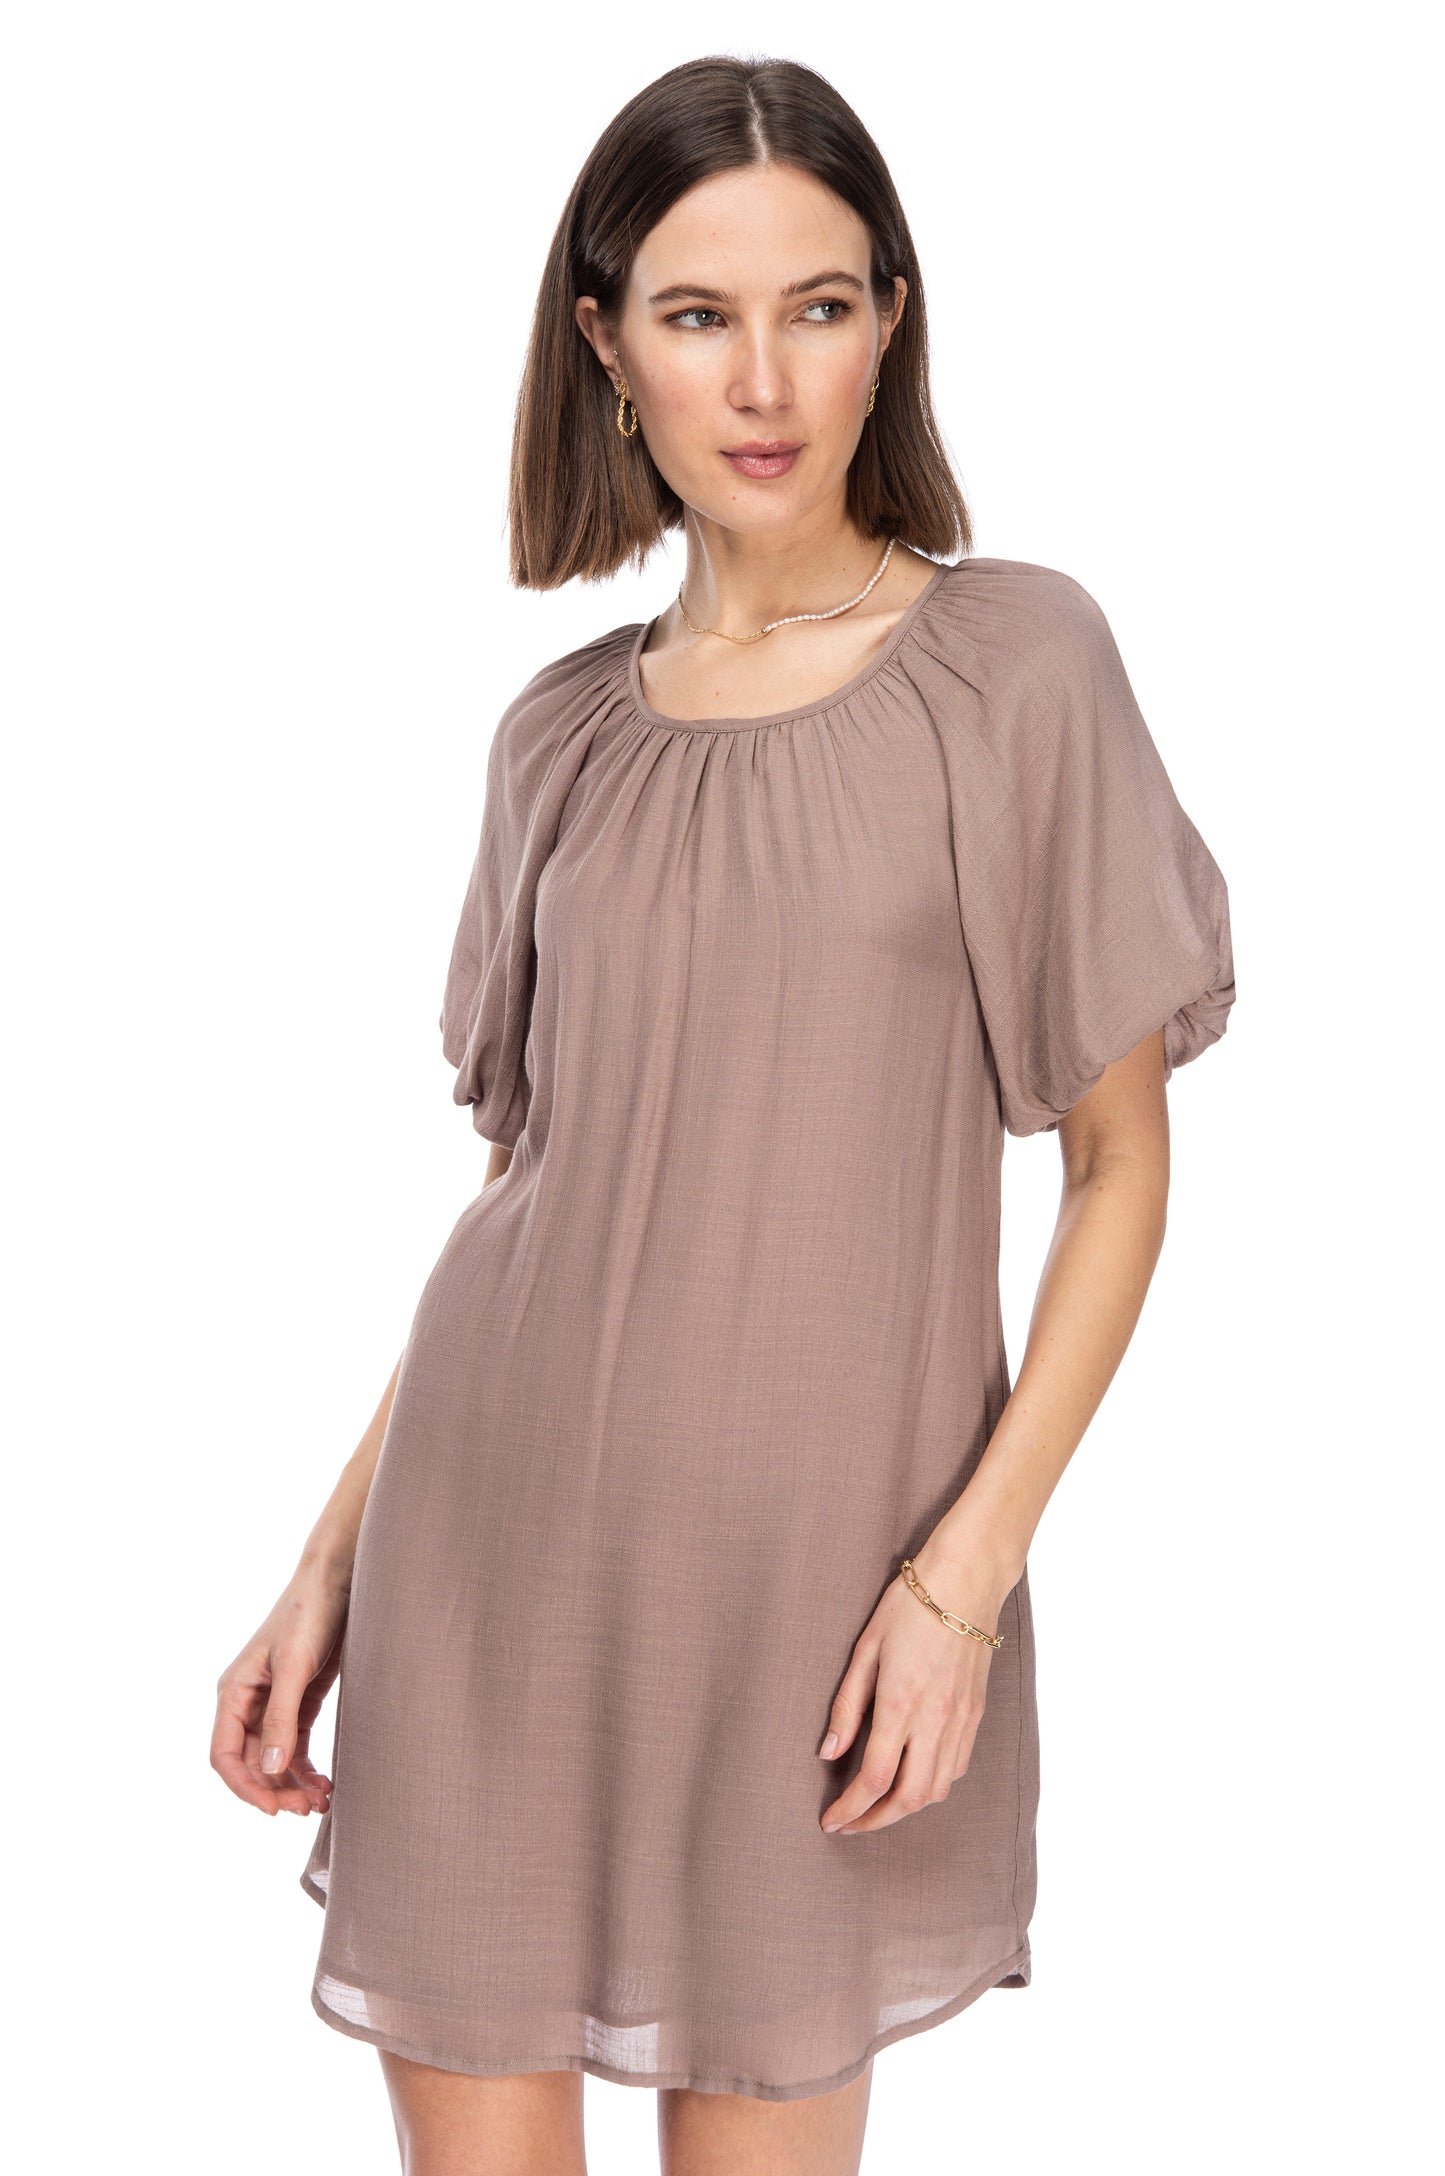 A woman modeling a taupe gauze B Collection by Bobeau dress with bubble sleeves and a round neckline, posing for a fashion shoot.